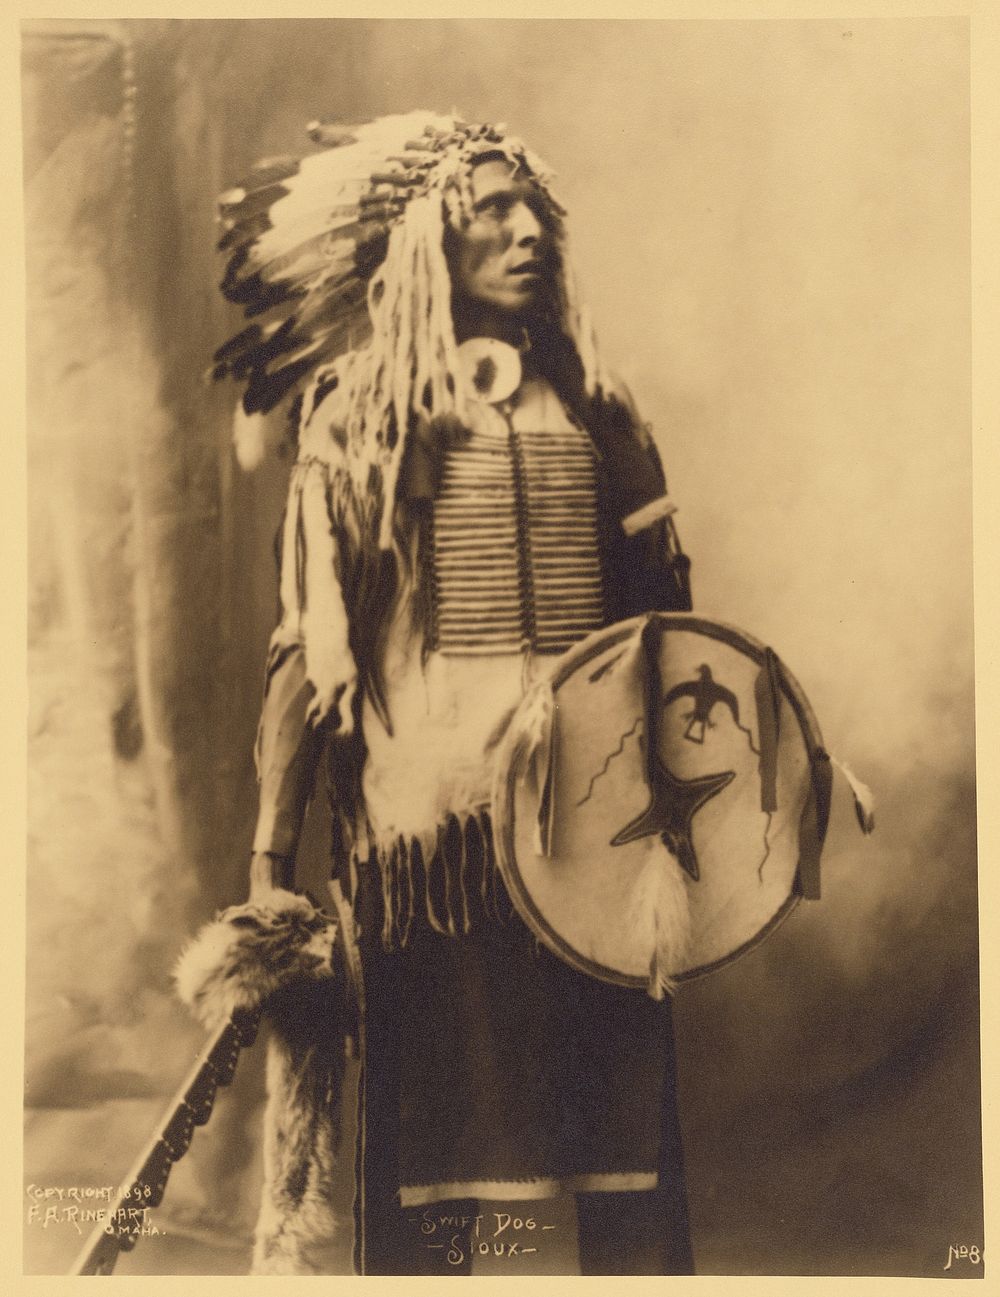 Swift Dog, Sioux by Adolph F Muhr and Frank A Rinehart